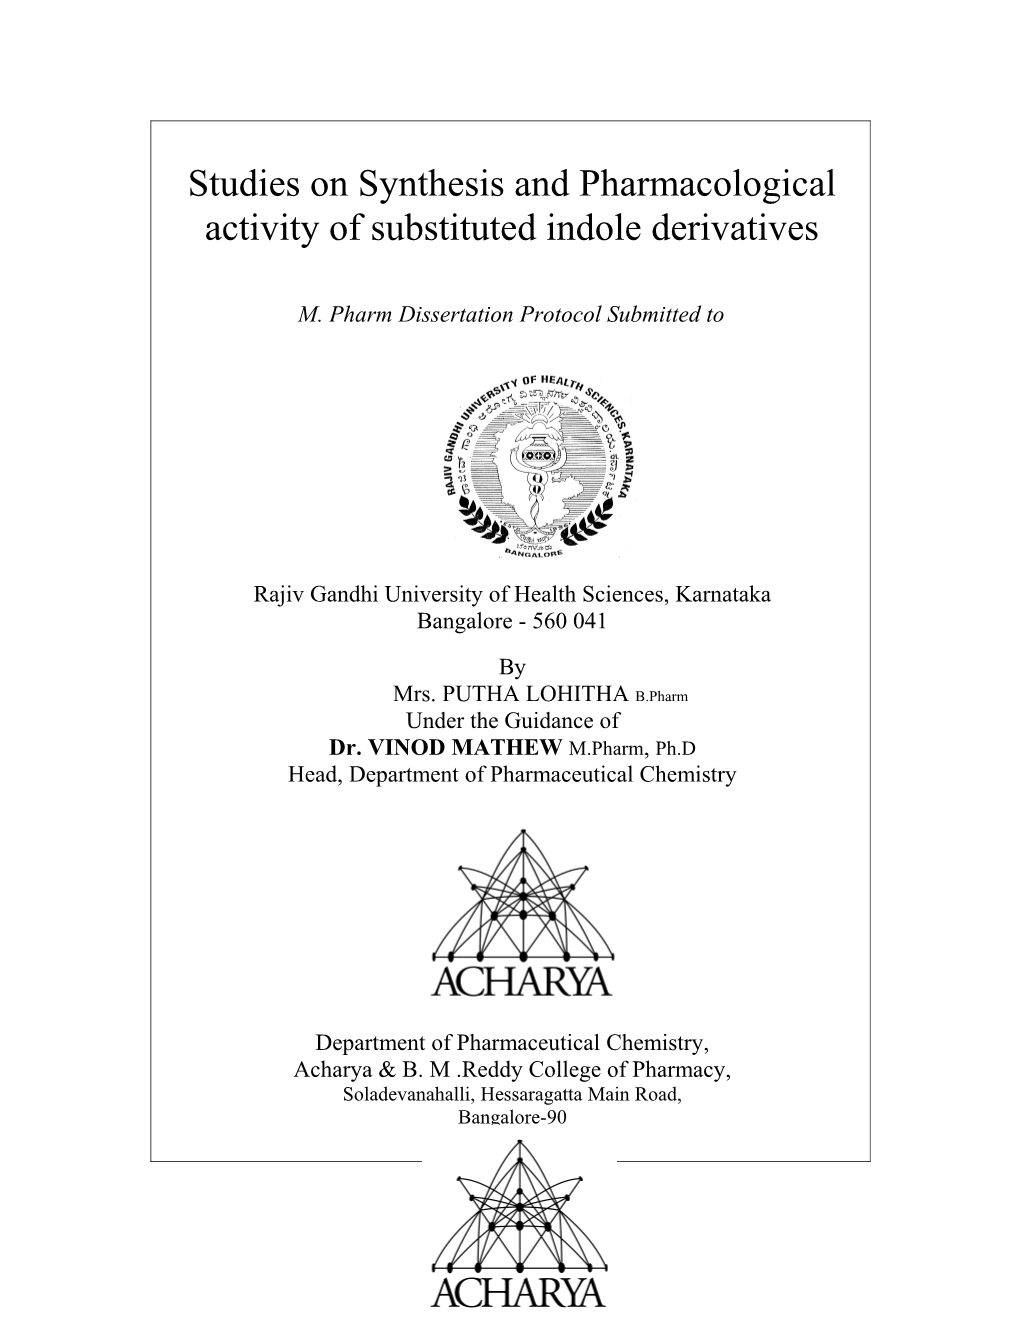 Studies on Synthesis and Pharmacological Activity of Substituted Indole Derivatives